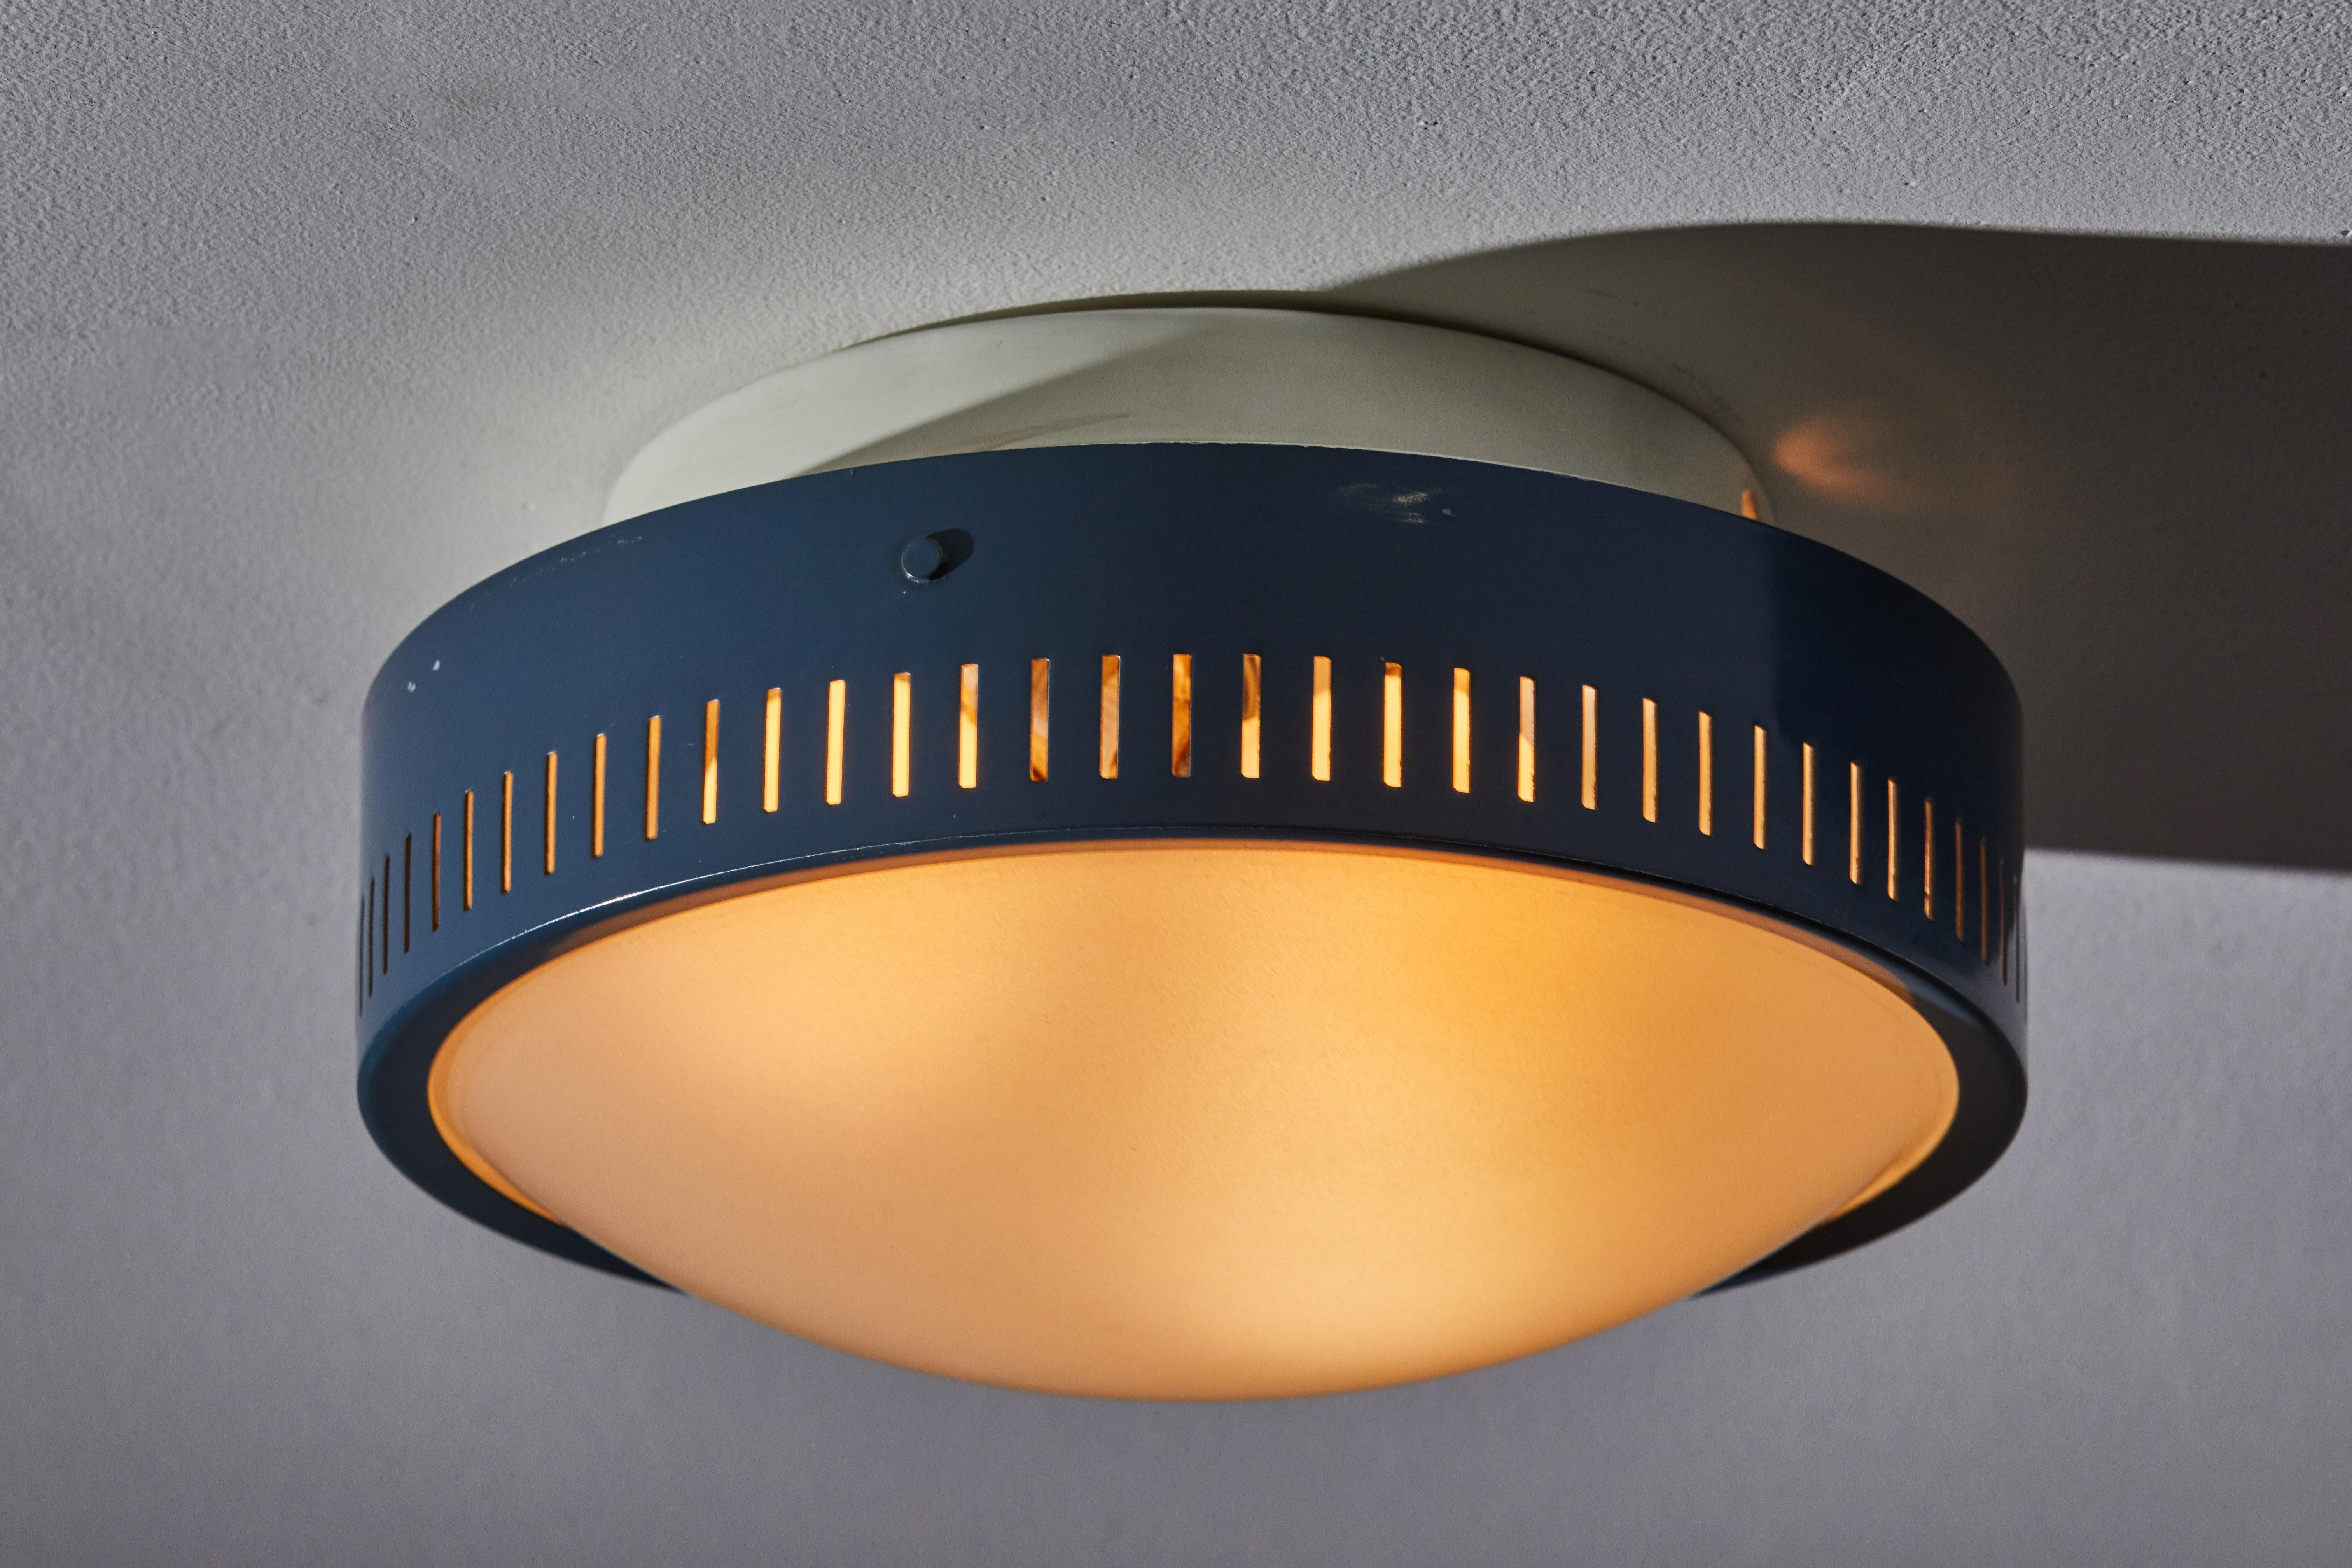 Flush mount ceiling light by Stilnovo. Manufactured in Italy, circa 1950s. Original enameled metal, opaline glass diffuser. Rewired for U.S. junction boxes. Takes three E27 60W maximum bulbs. Bulbs provided as a onetime courtesy.